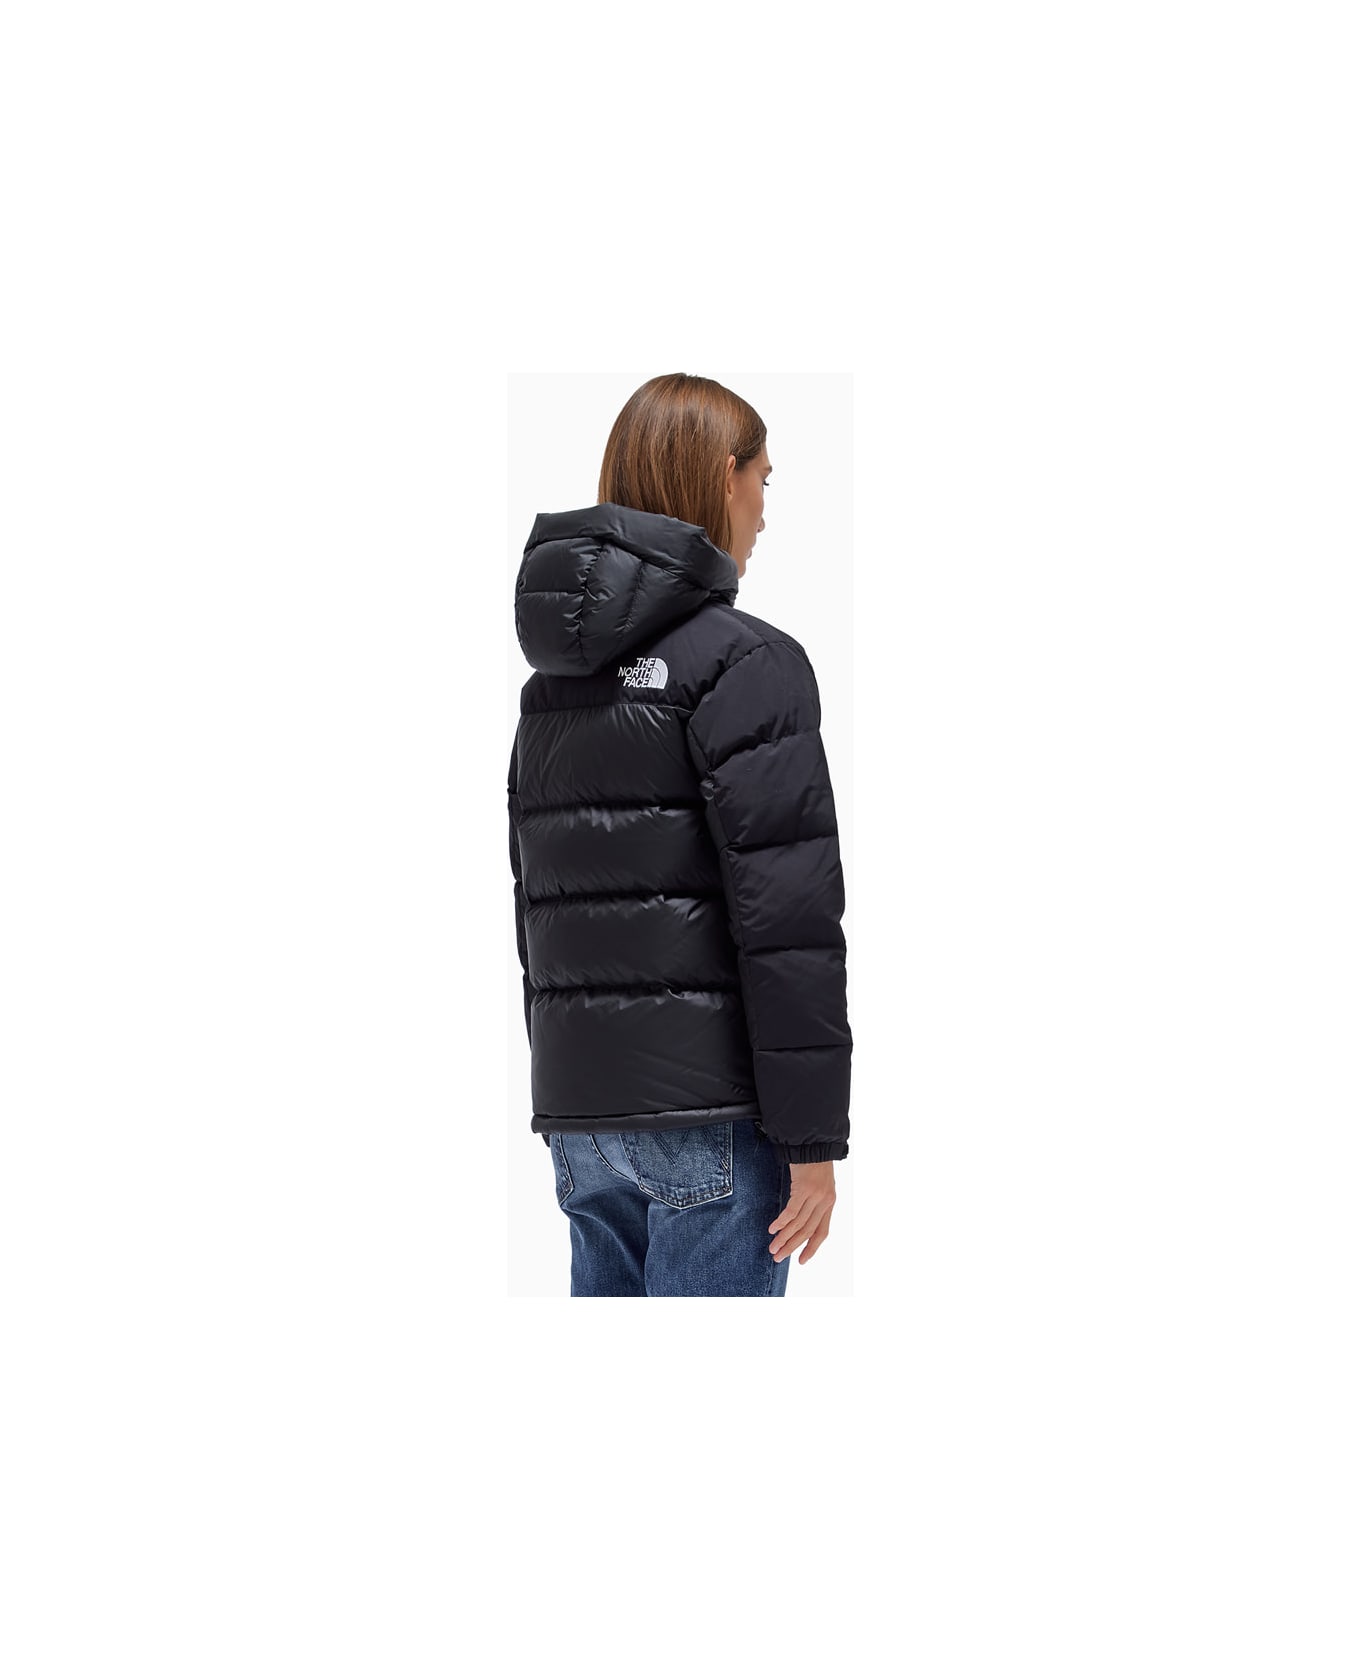 The North Face Hmlyn Down Parka Jacket - BLACK